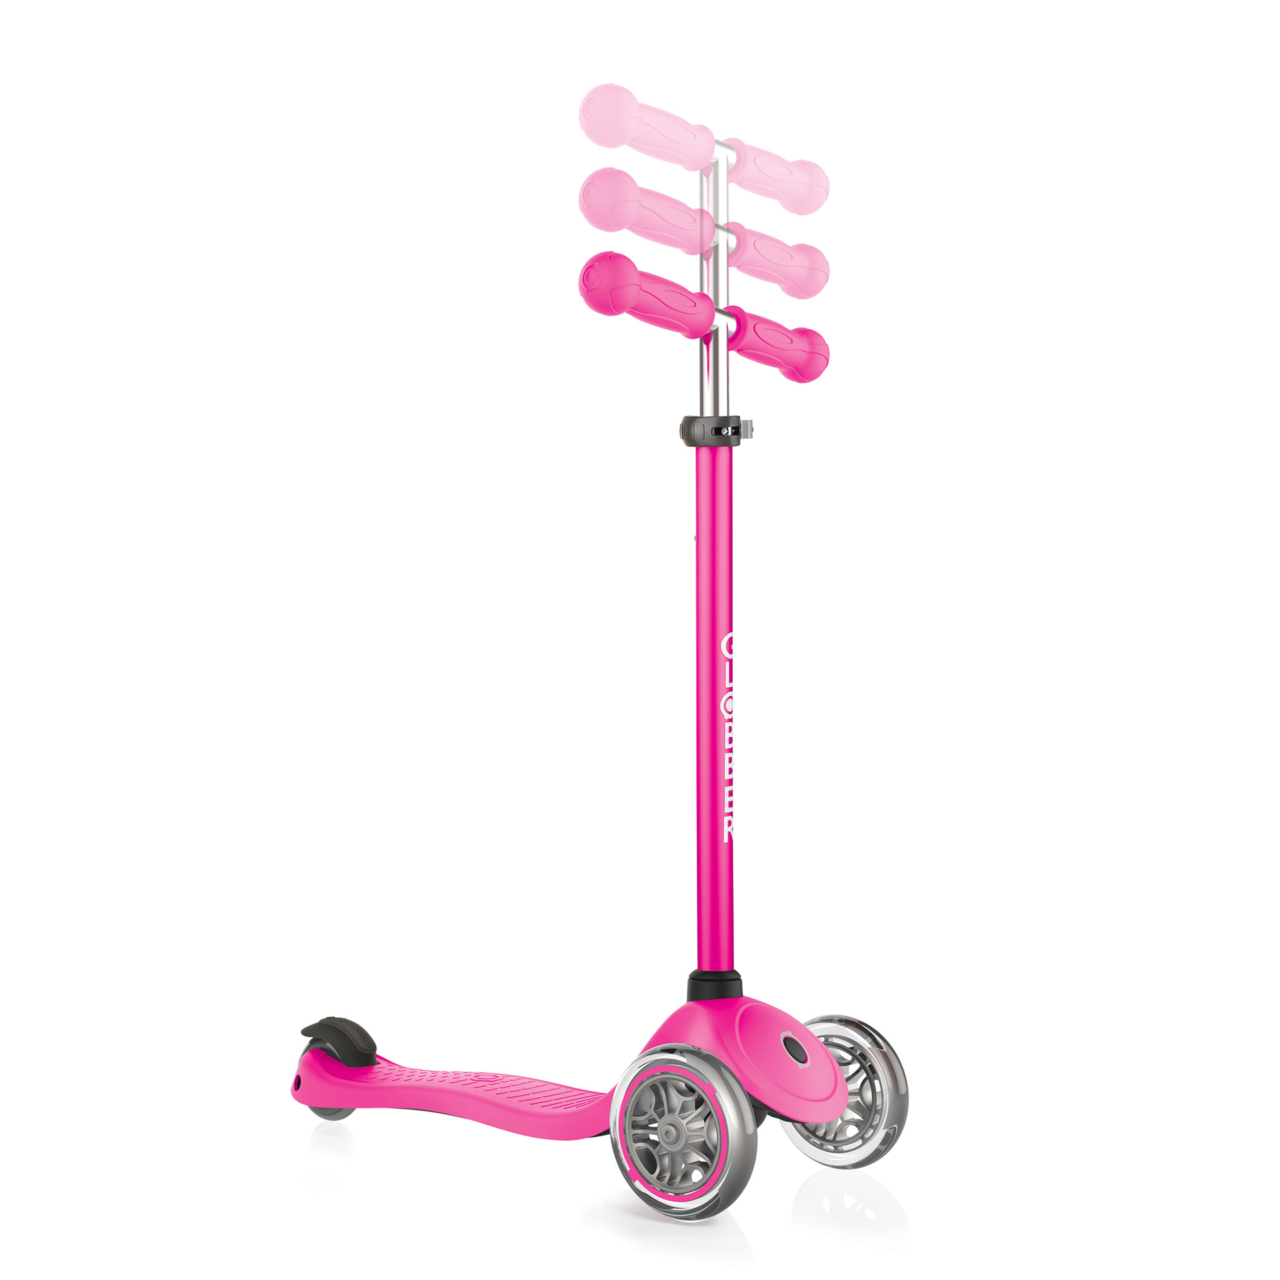 422 110 3 Adjustable Scooter For 3 Year Olds